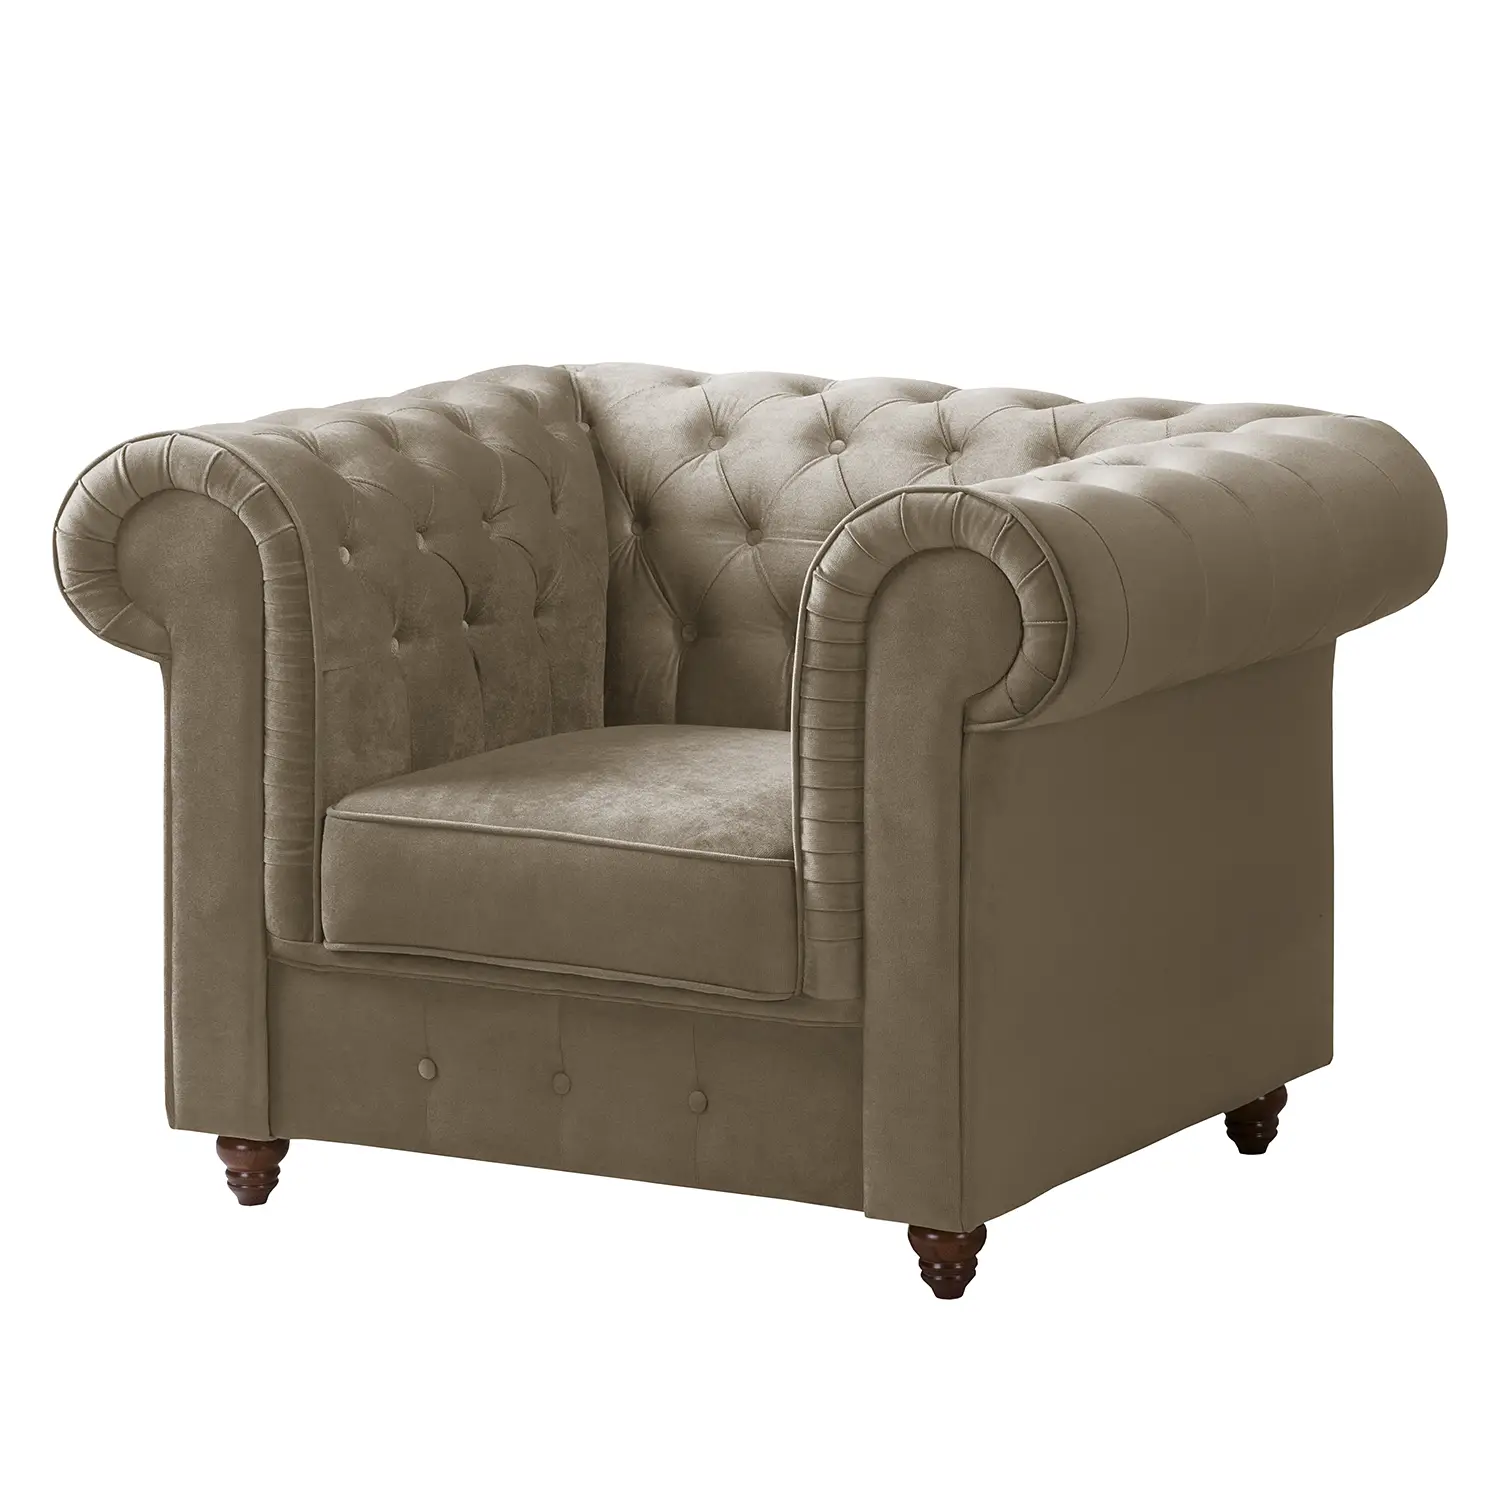 Chesterfield Pintano Sessel